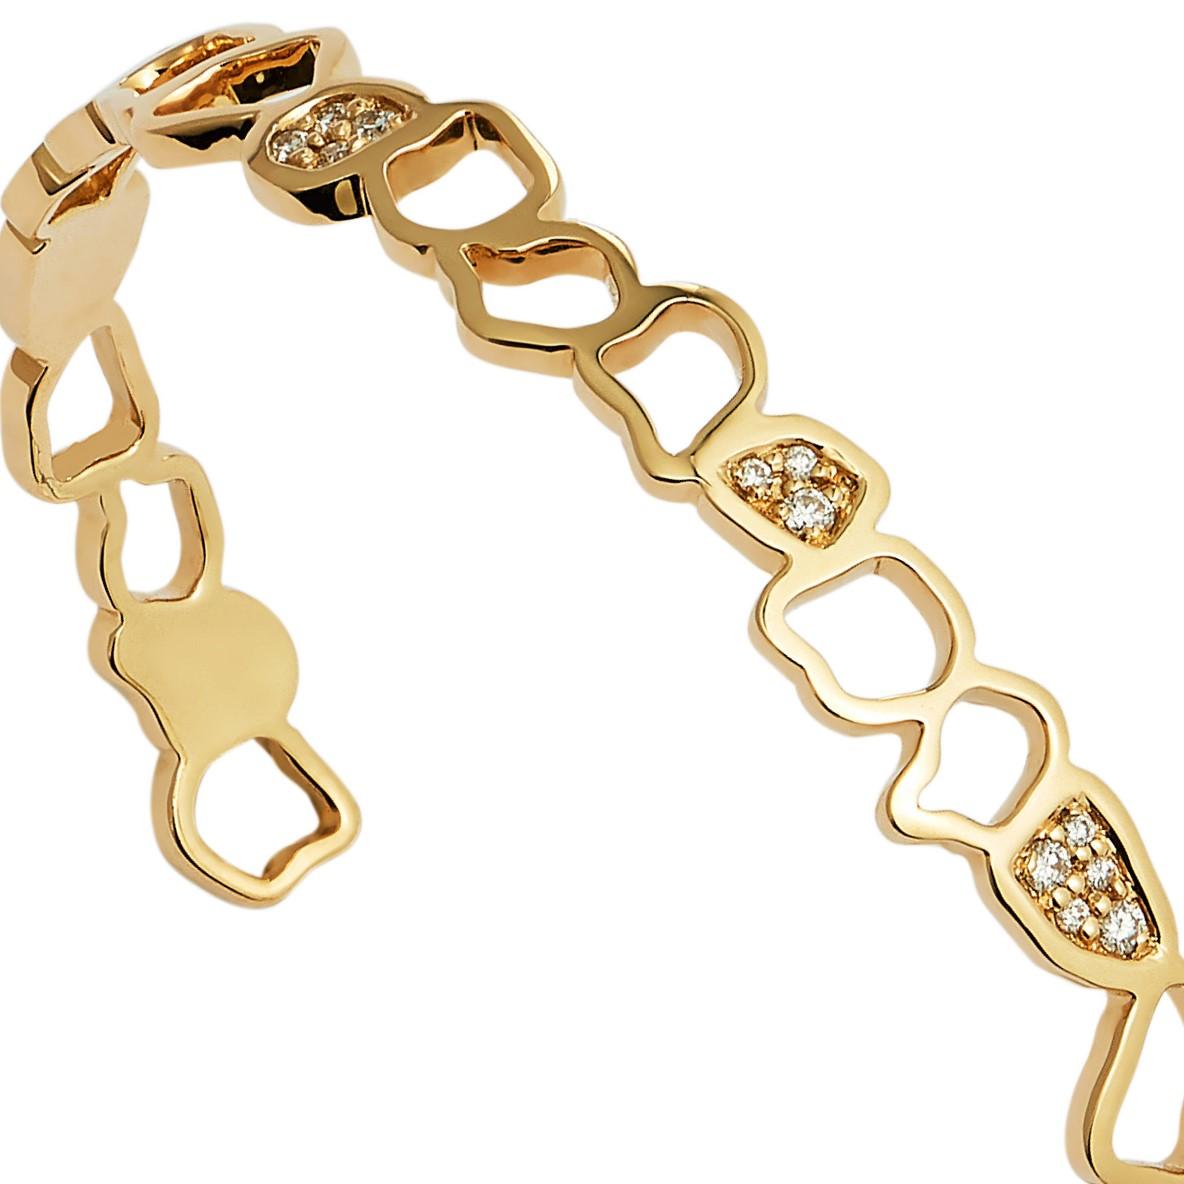 Contemporary 18 Karat Yellow Gold Cuff Bracelet With Diamonds For Sale